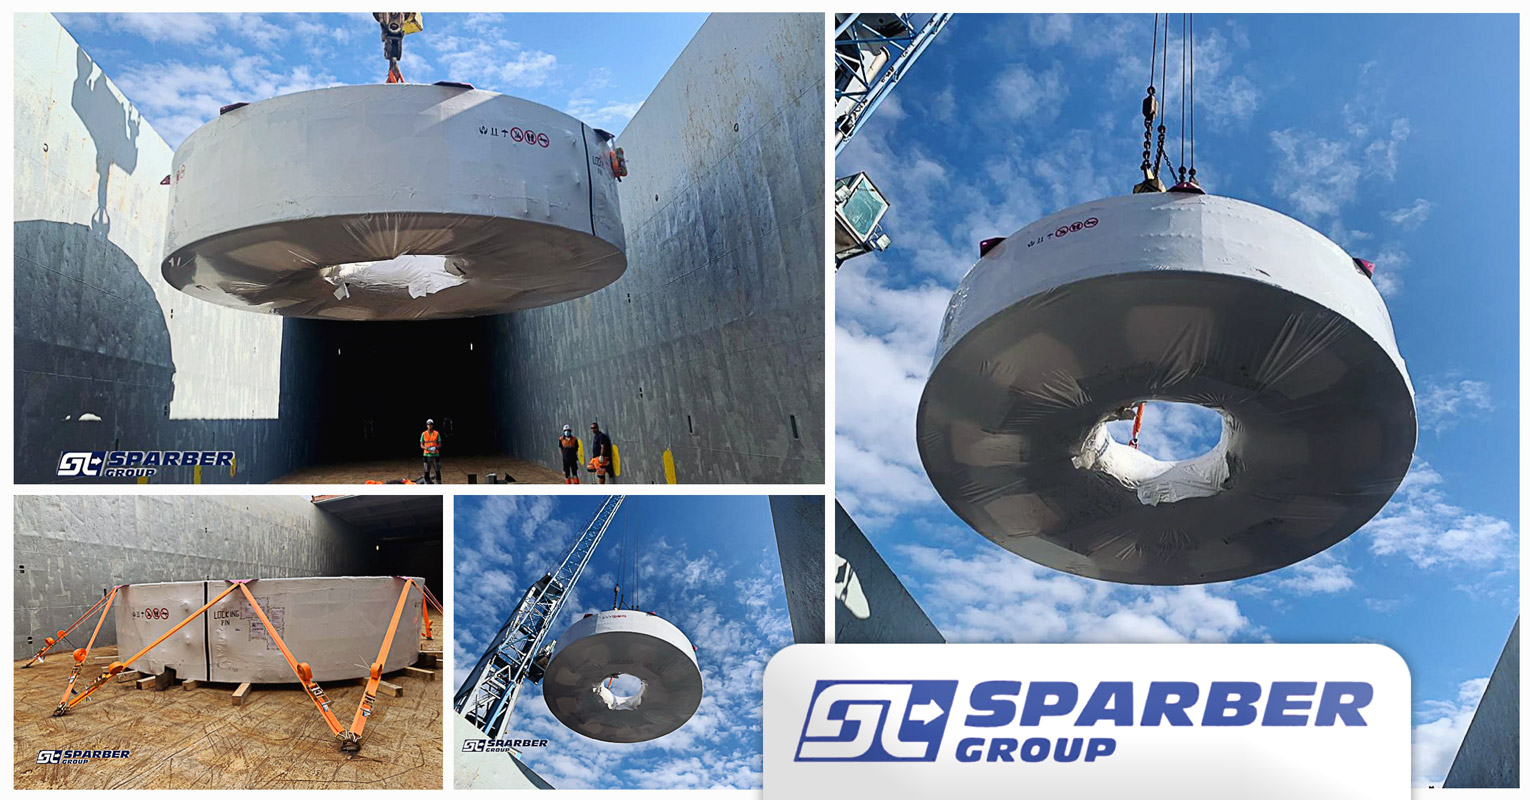 Sparber Group Shipped Wind Power Equipment from Spain to France